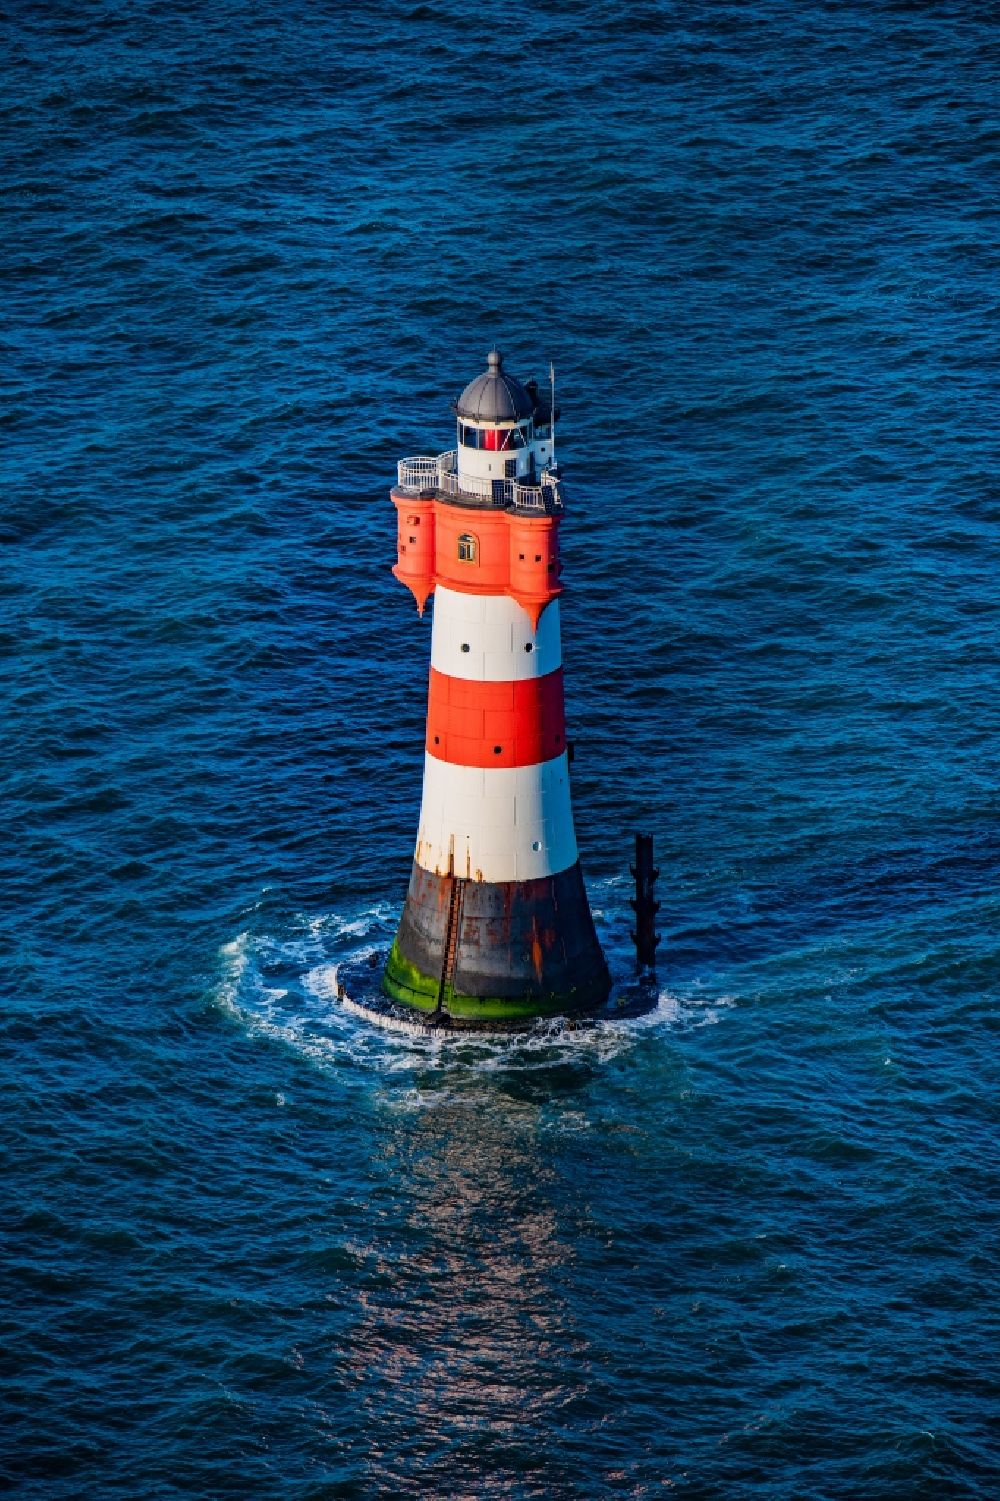 Wangerooge from the bird's eye view: Lighthouse Roter Sand as a historic seafaring character in the waters of the North Sea by the mouth of the river Weser in Germany